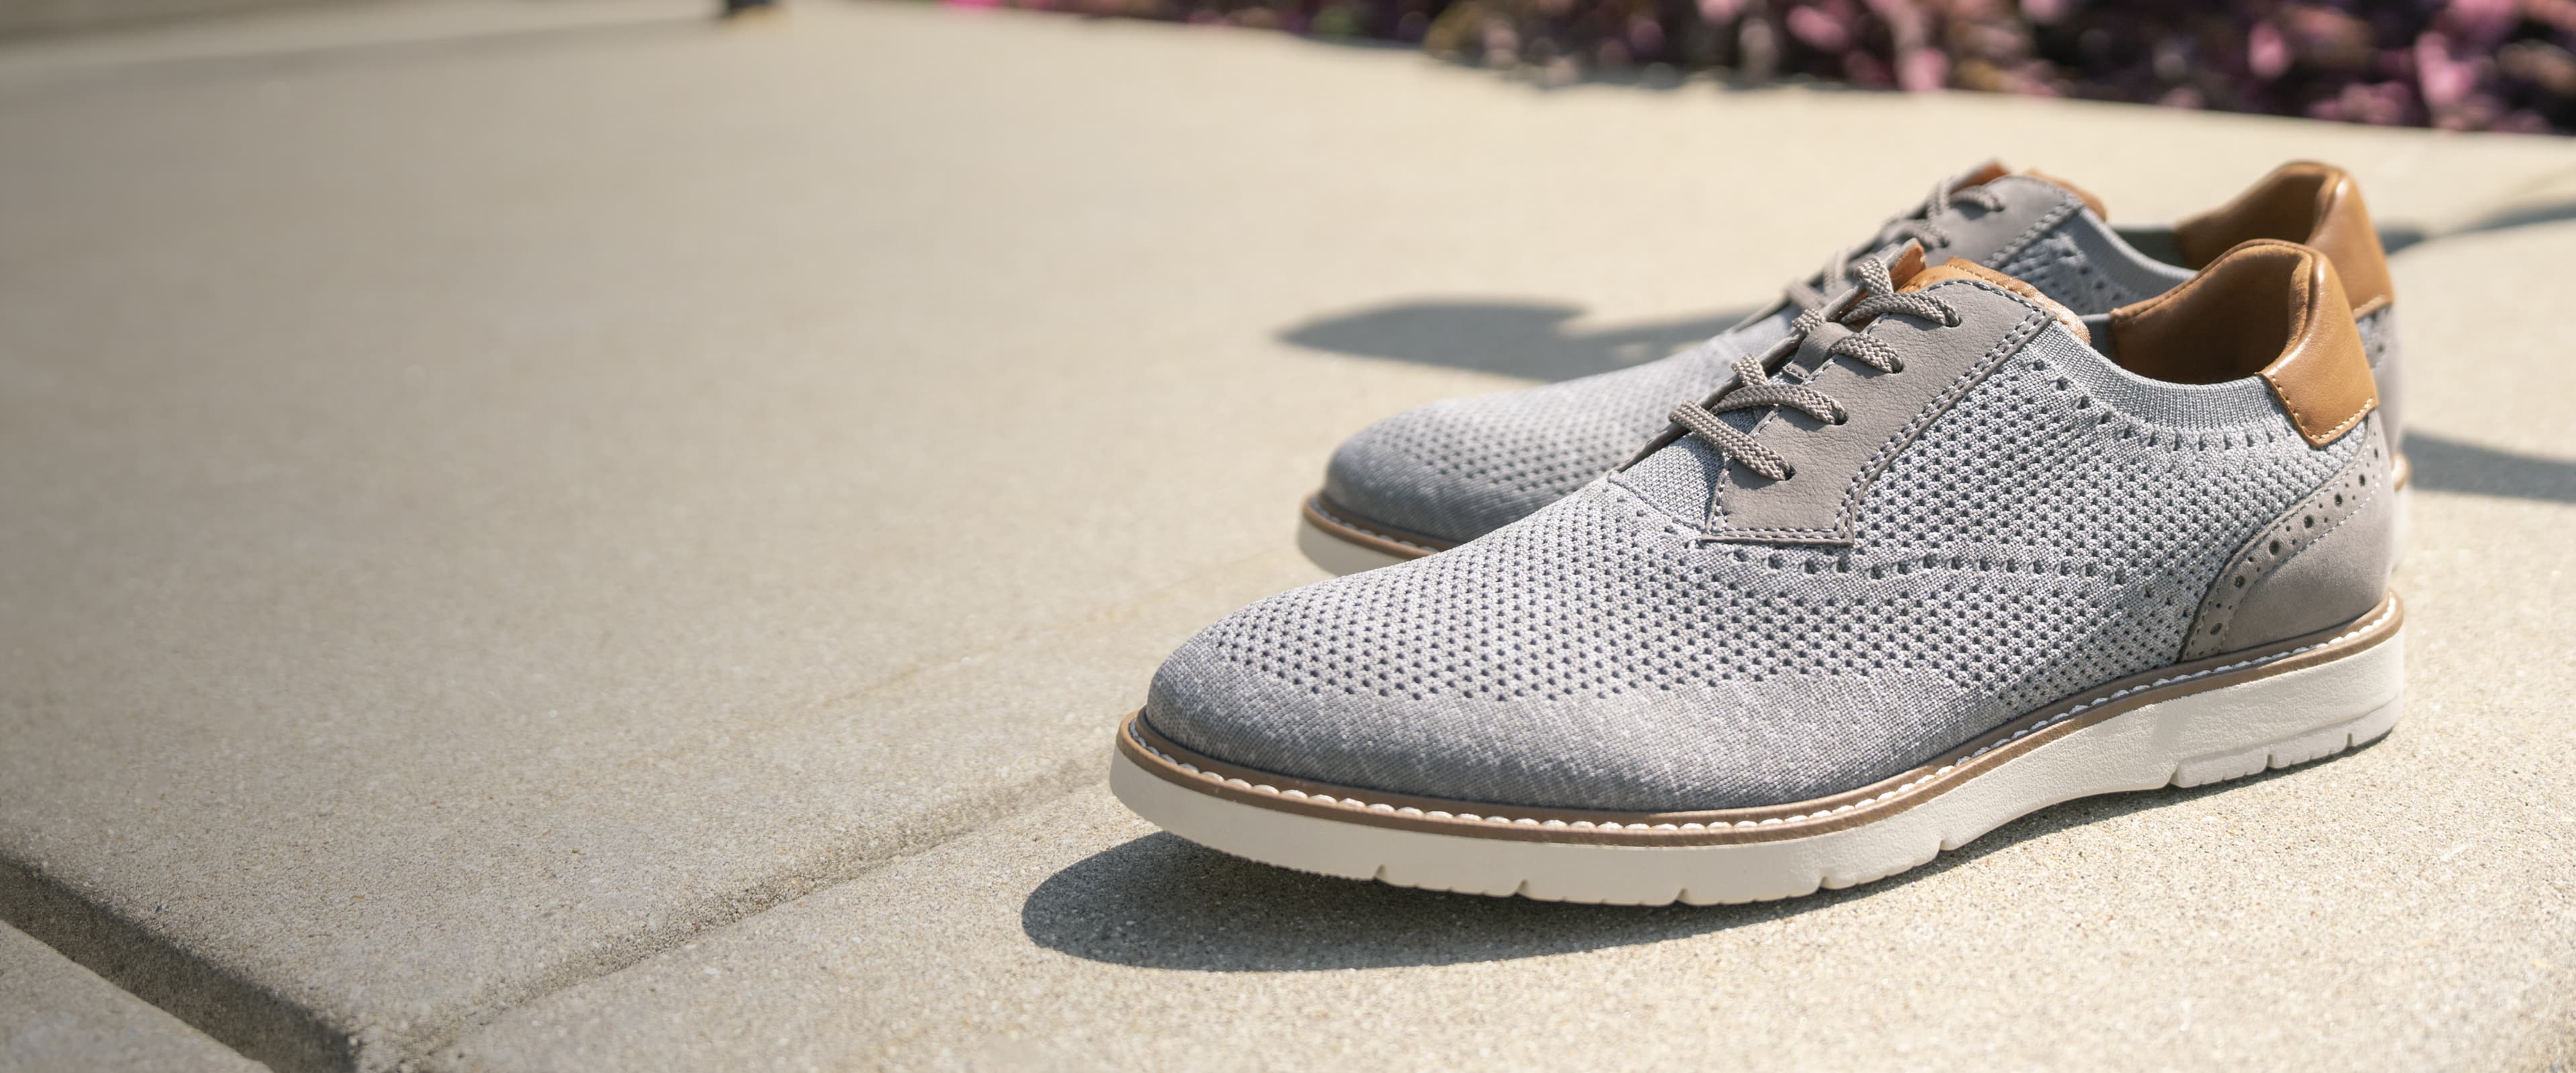 Florsheim new arrivals featuring the Vibe Knit in grey on a sidewalk.